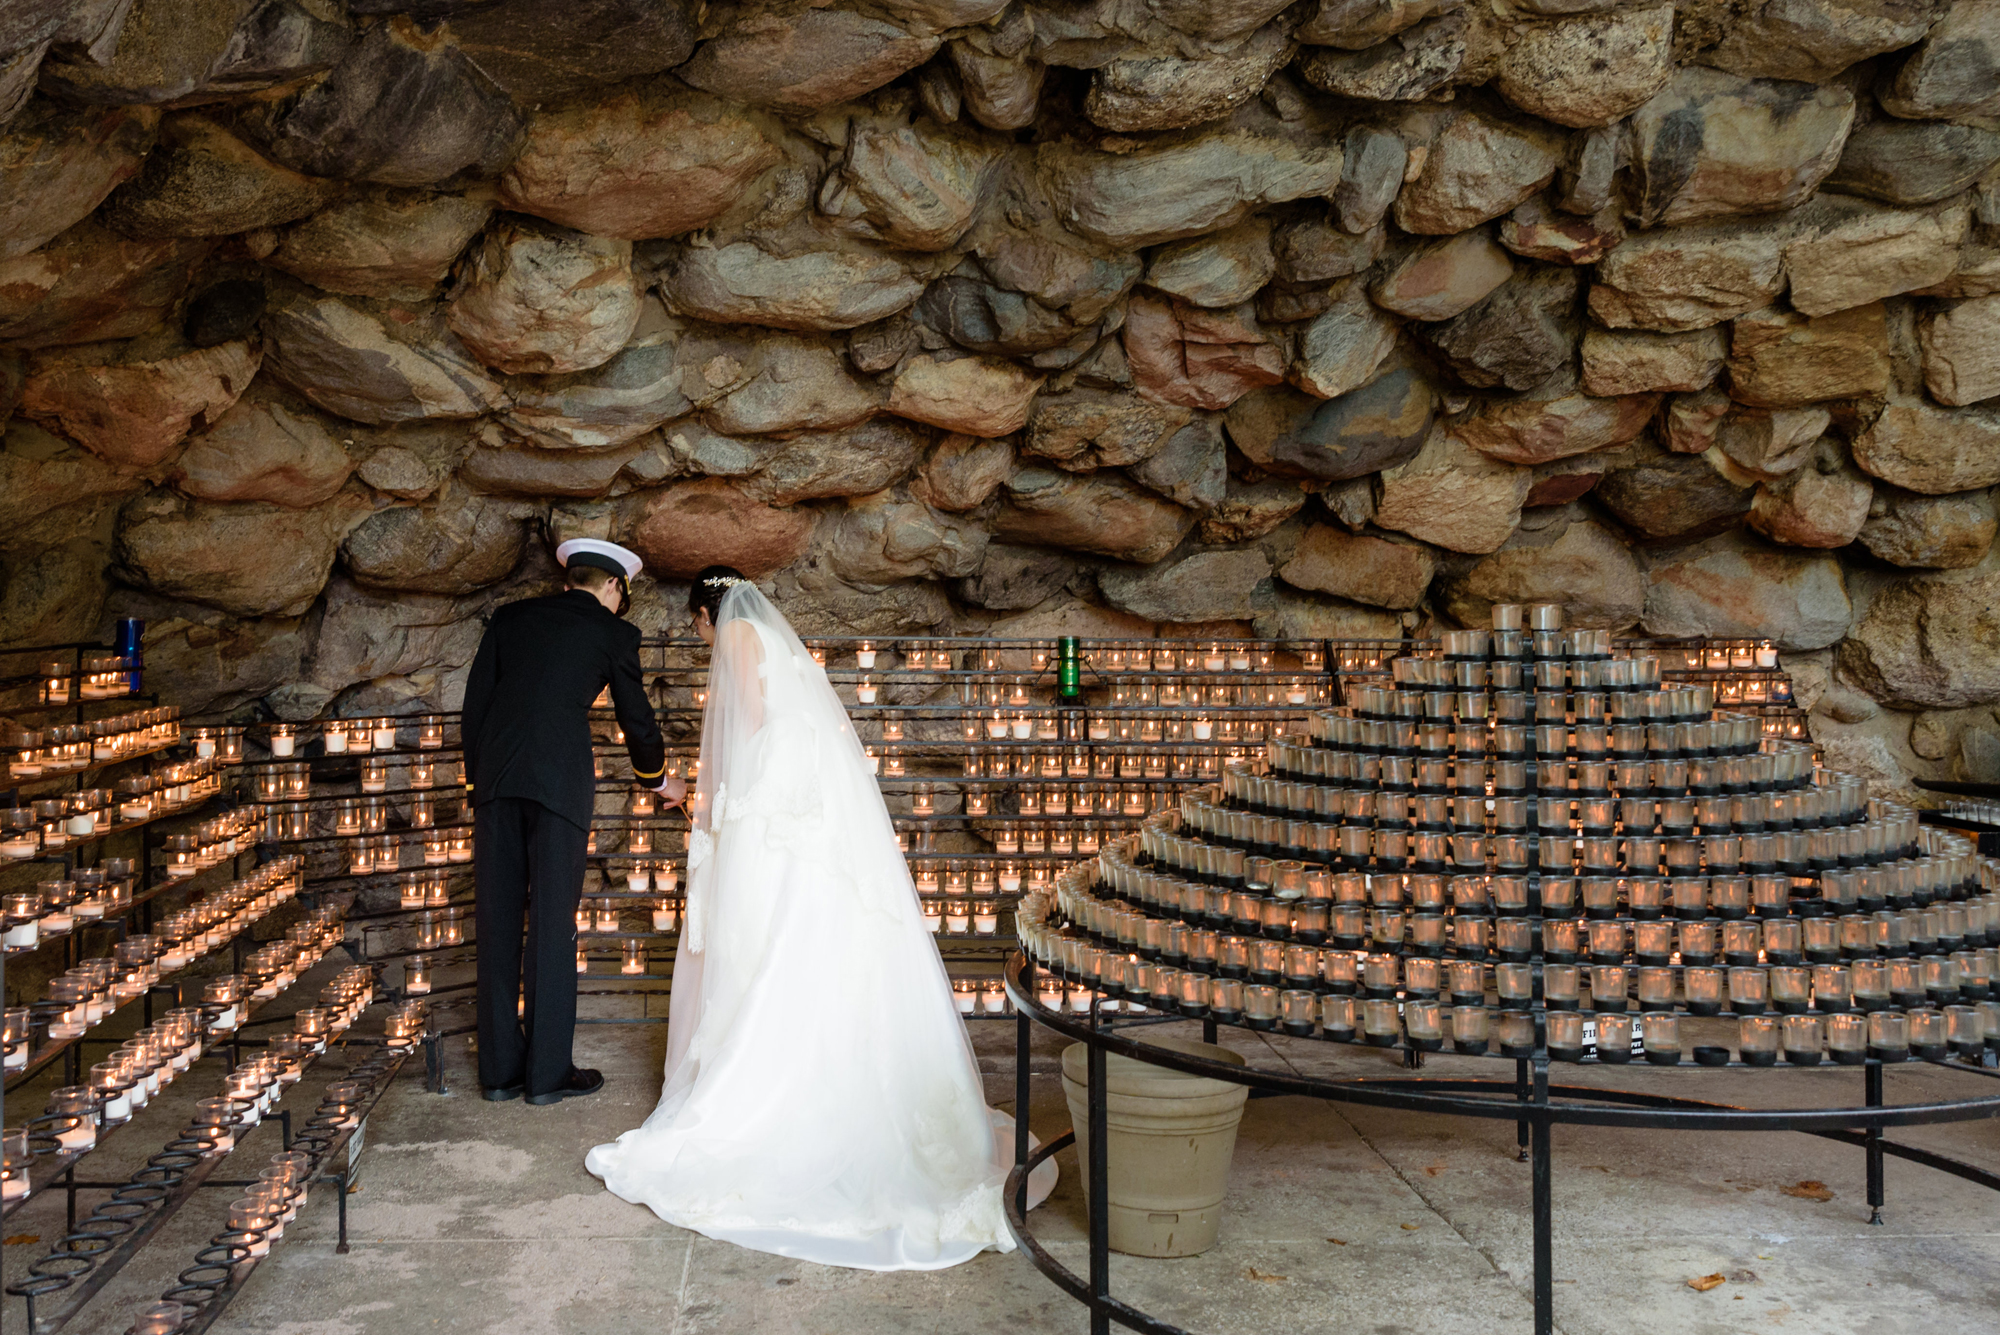 Bride & Groom Lighting a candle at the Grotto after their wedding ceremony at the Basilica of the Sacred Heart on the campus of the University of Notre Dame